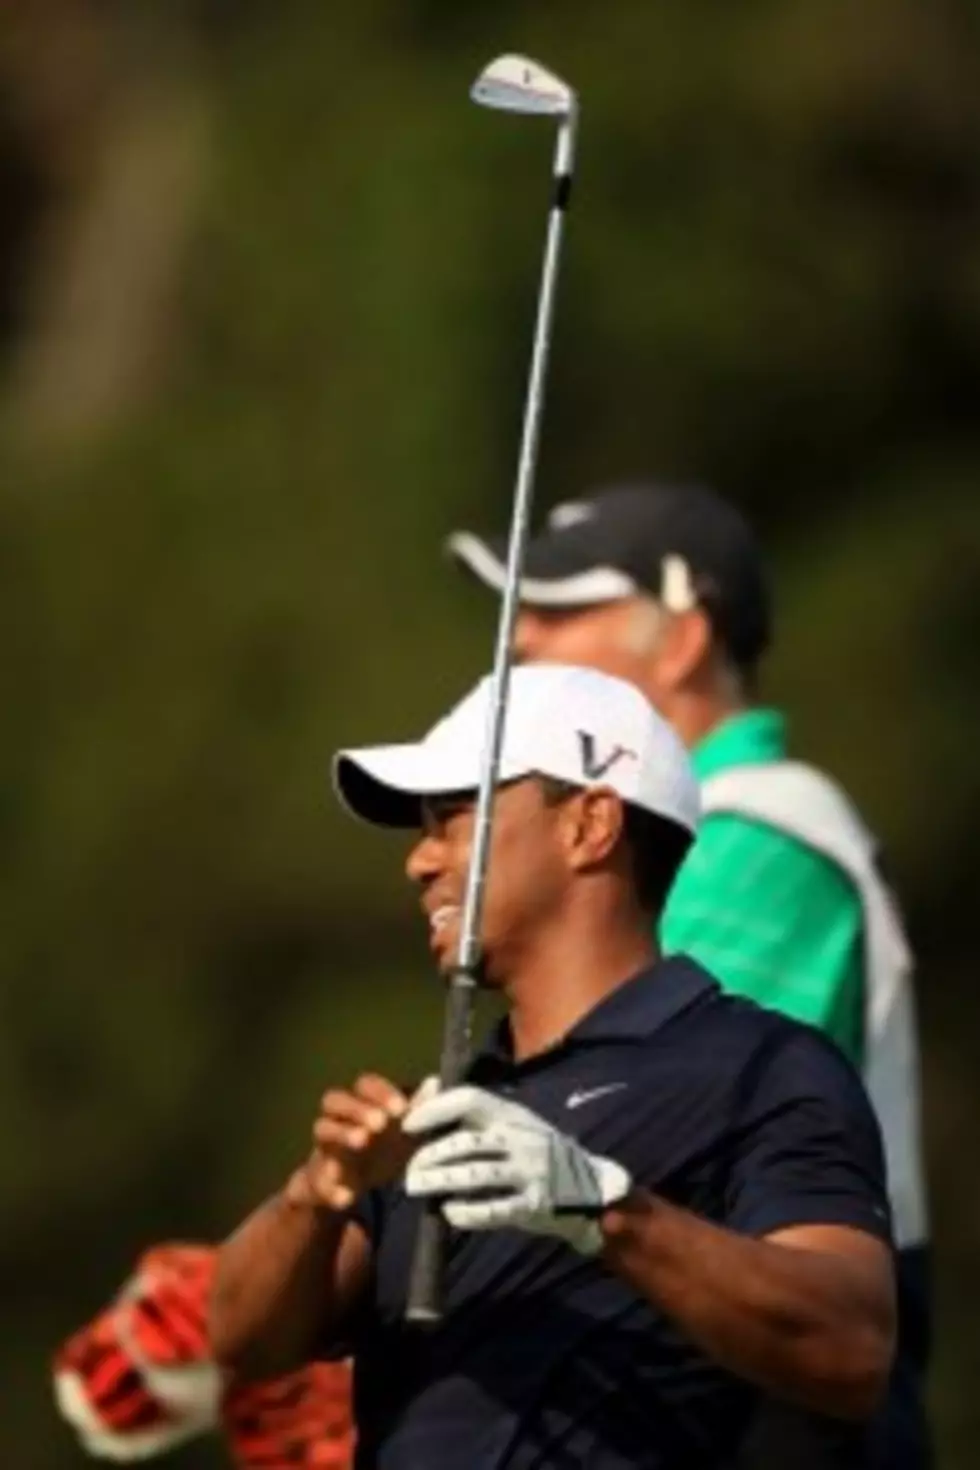 Injured Tiger Woods Withdraws from Players Tournament